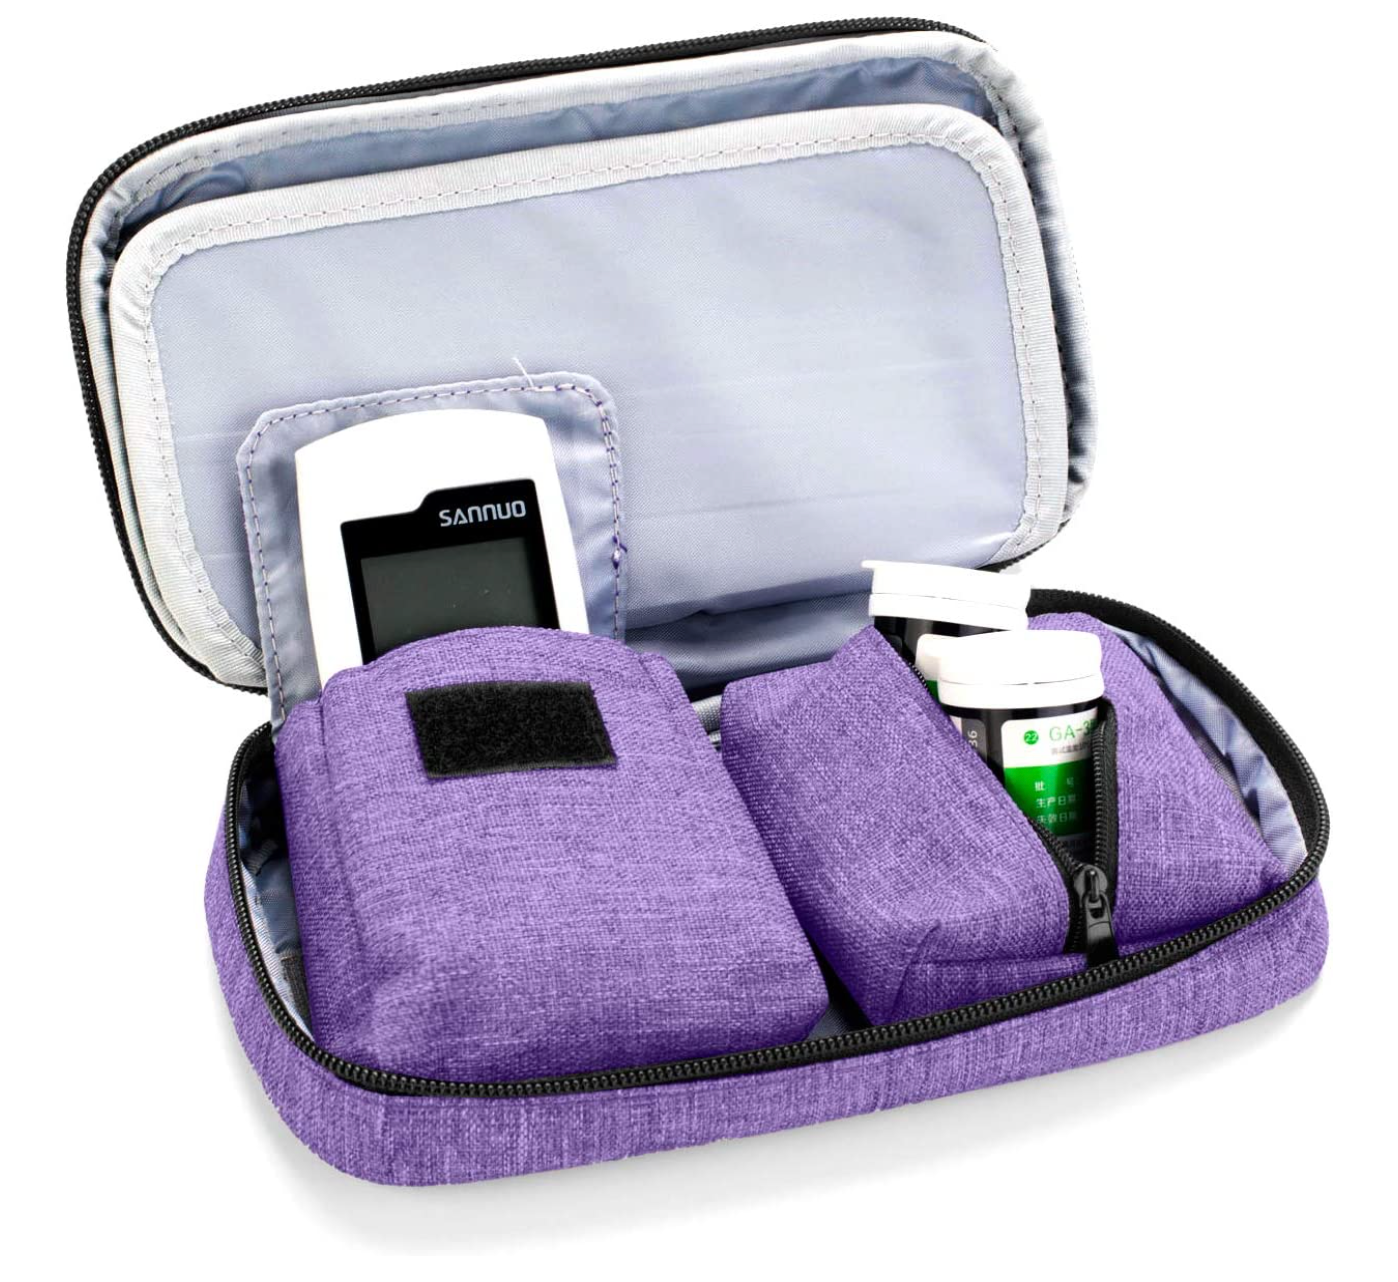 Diabetic Storage Bag for Glucose Meter and Other Diabetic Supplies